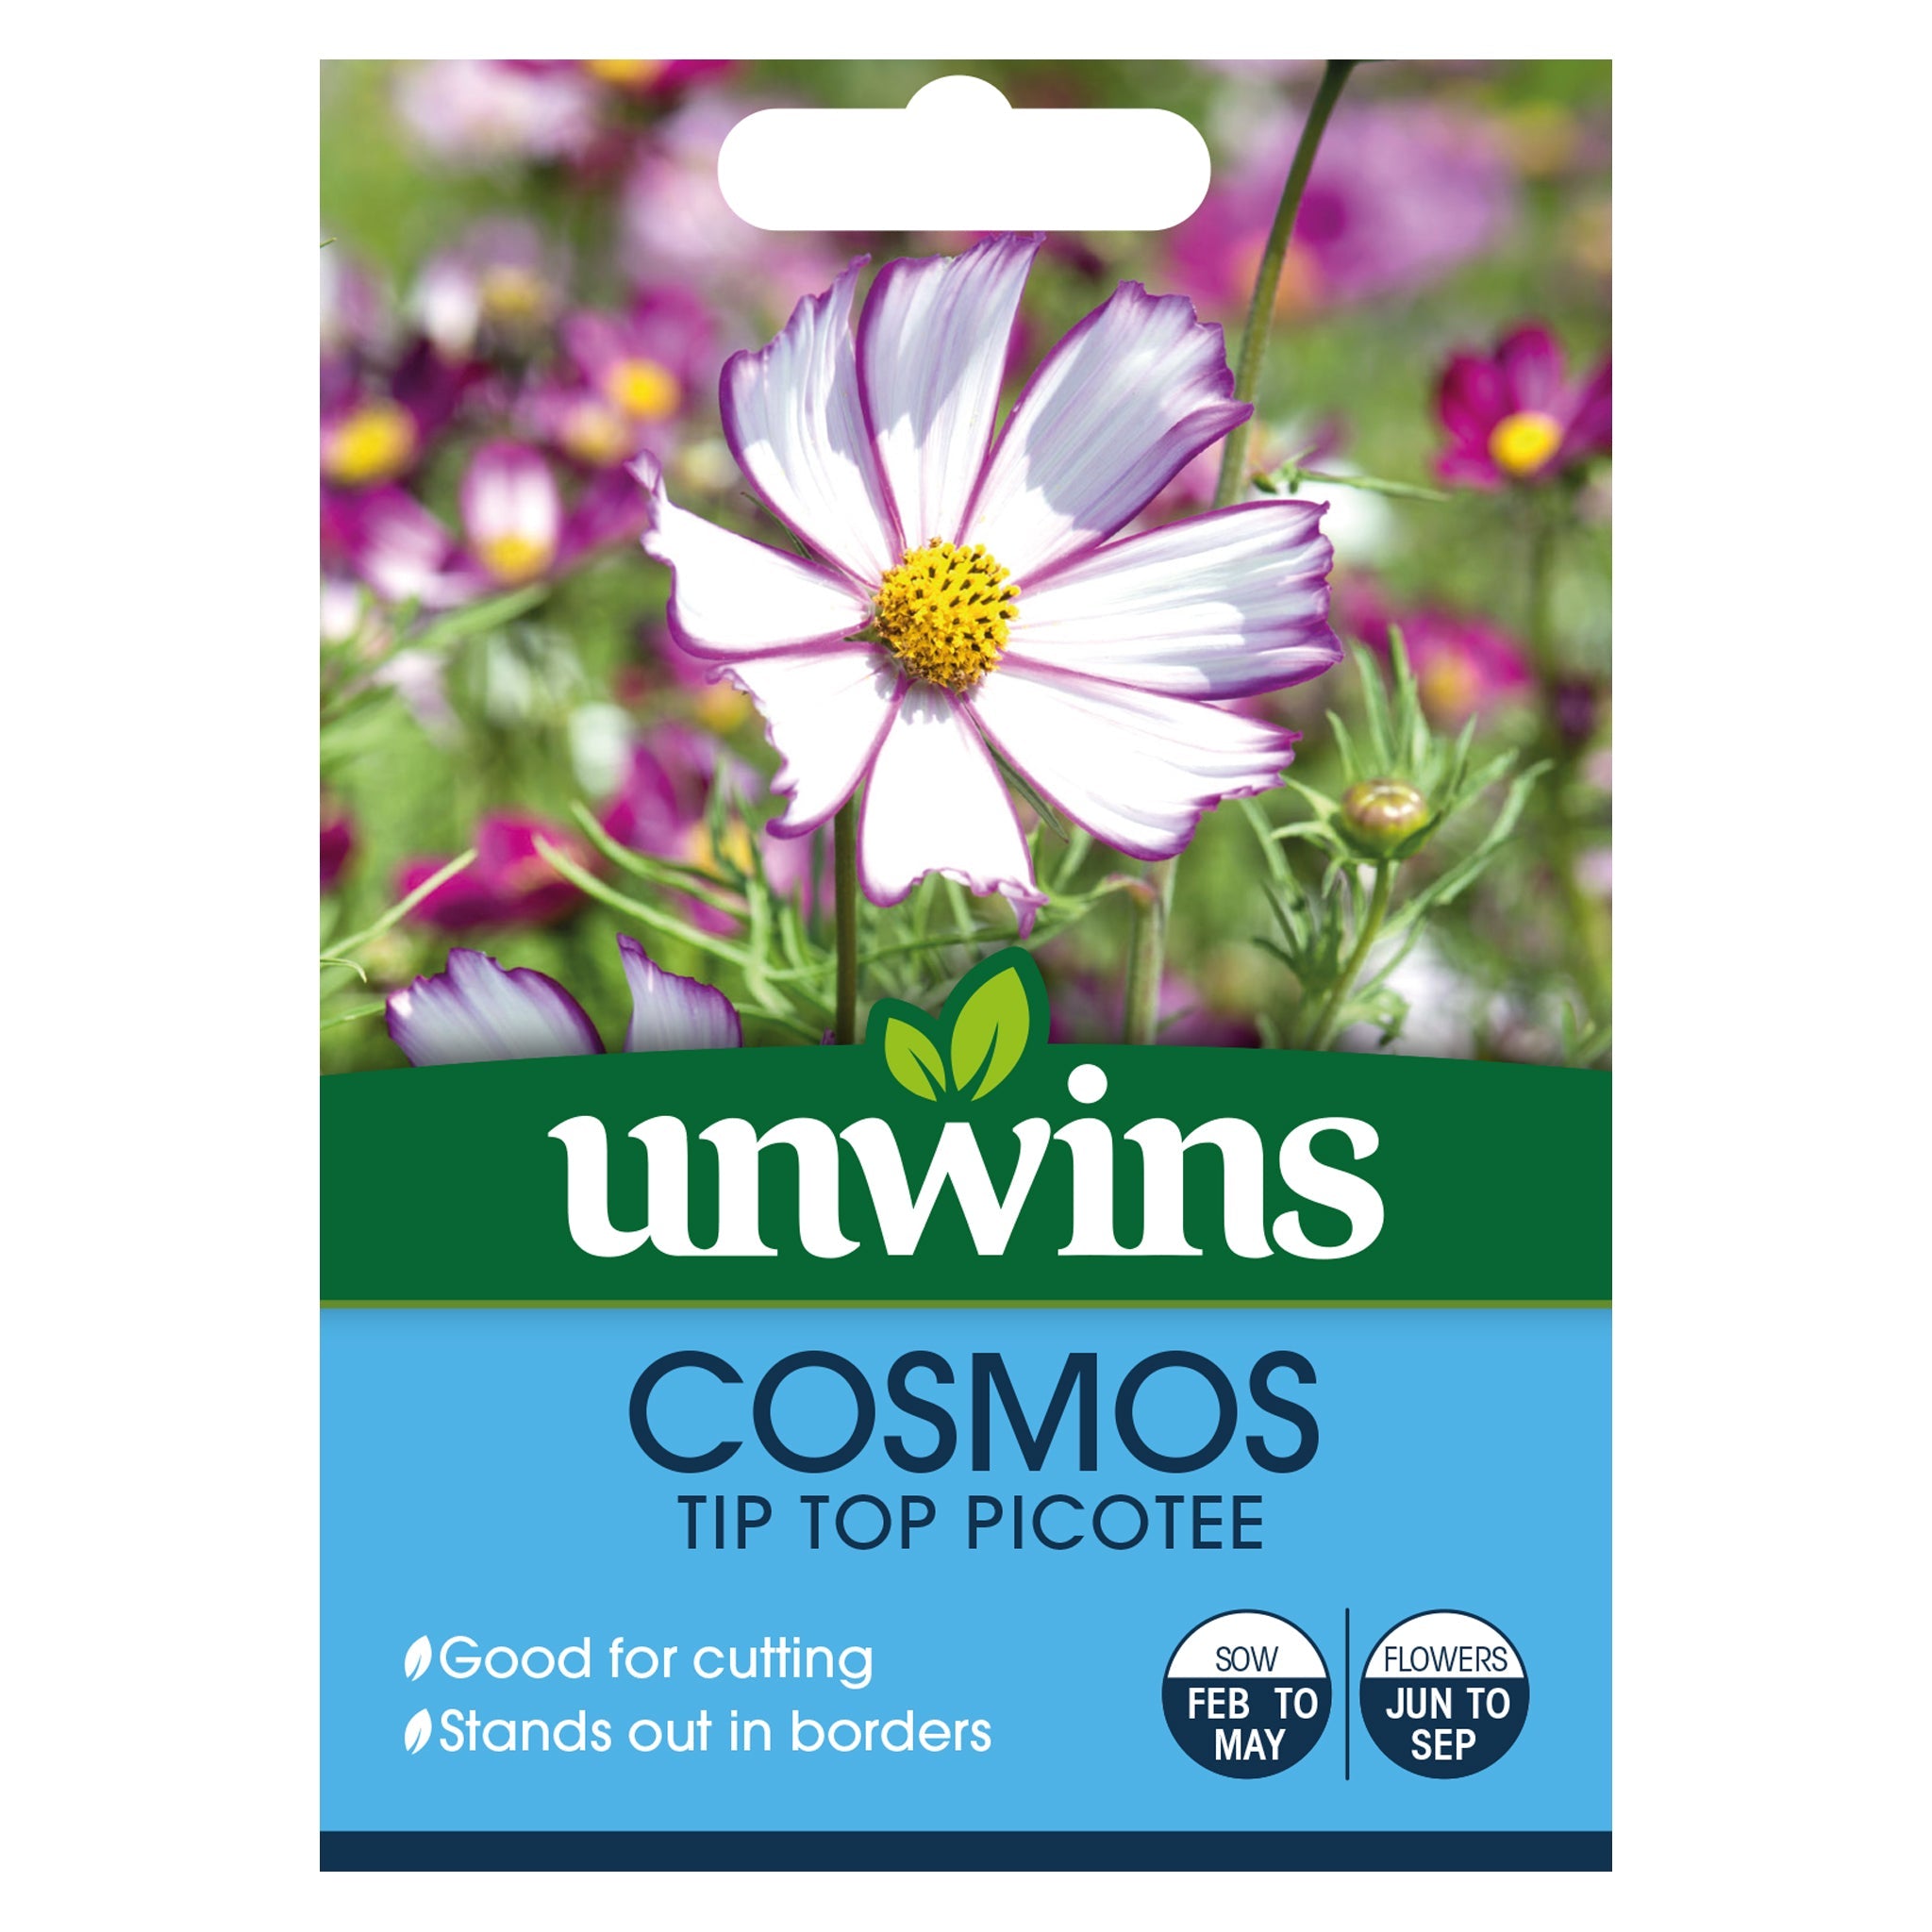 Cosmos Tip Top Picotee Seeds